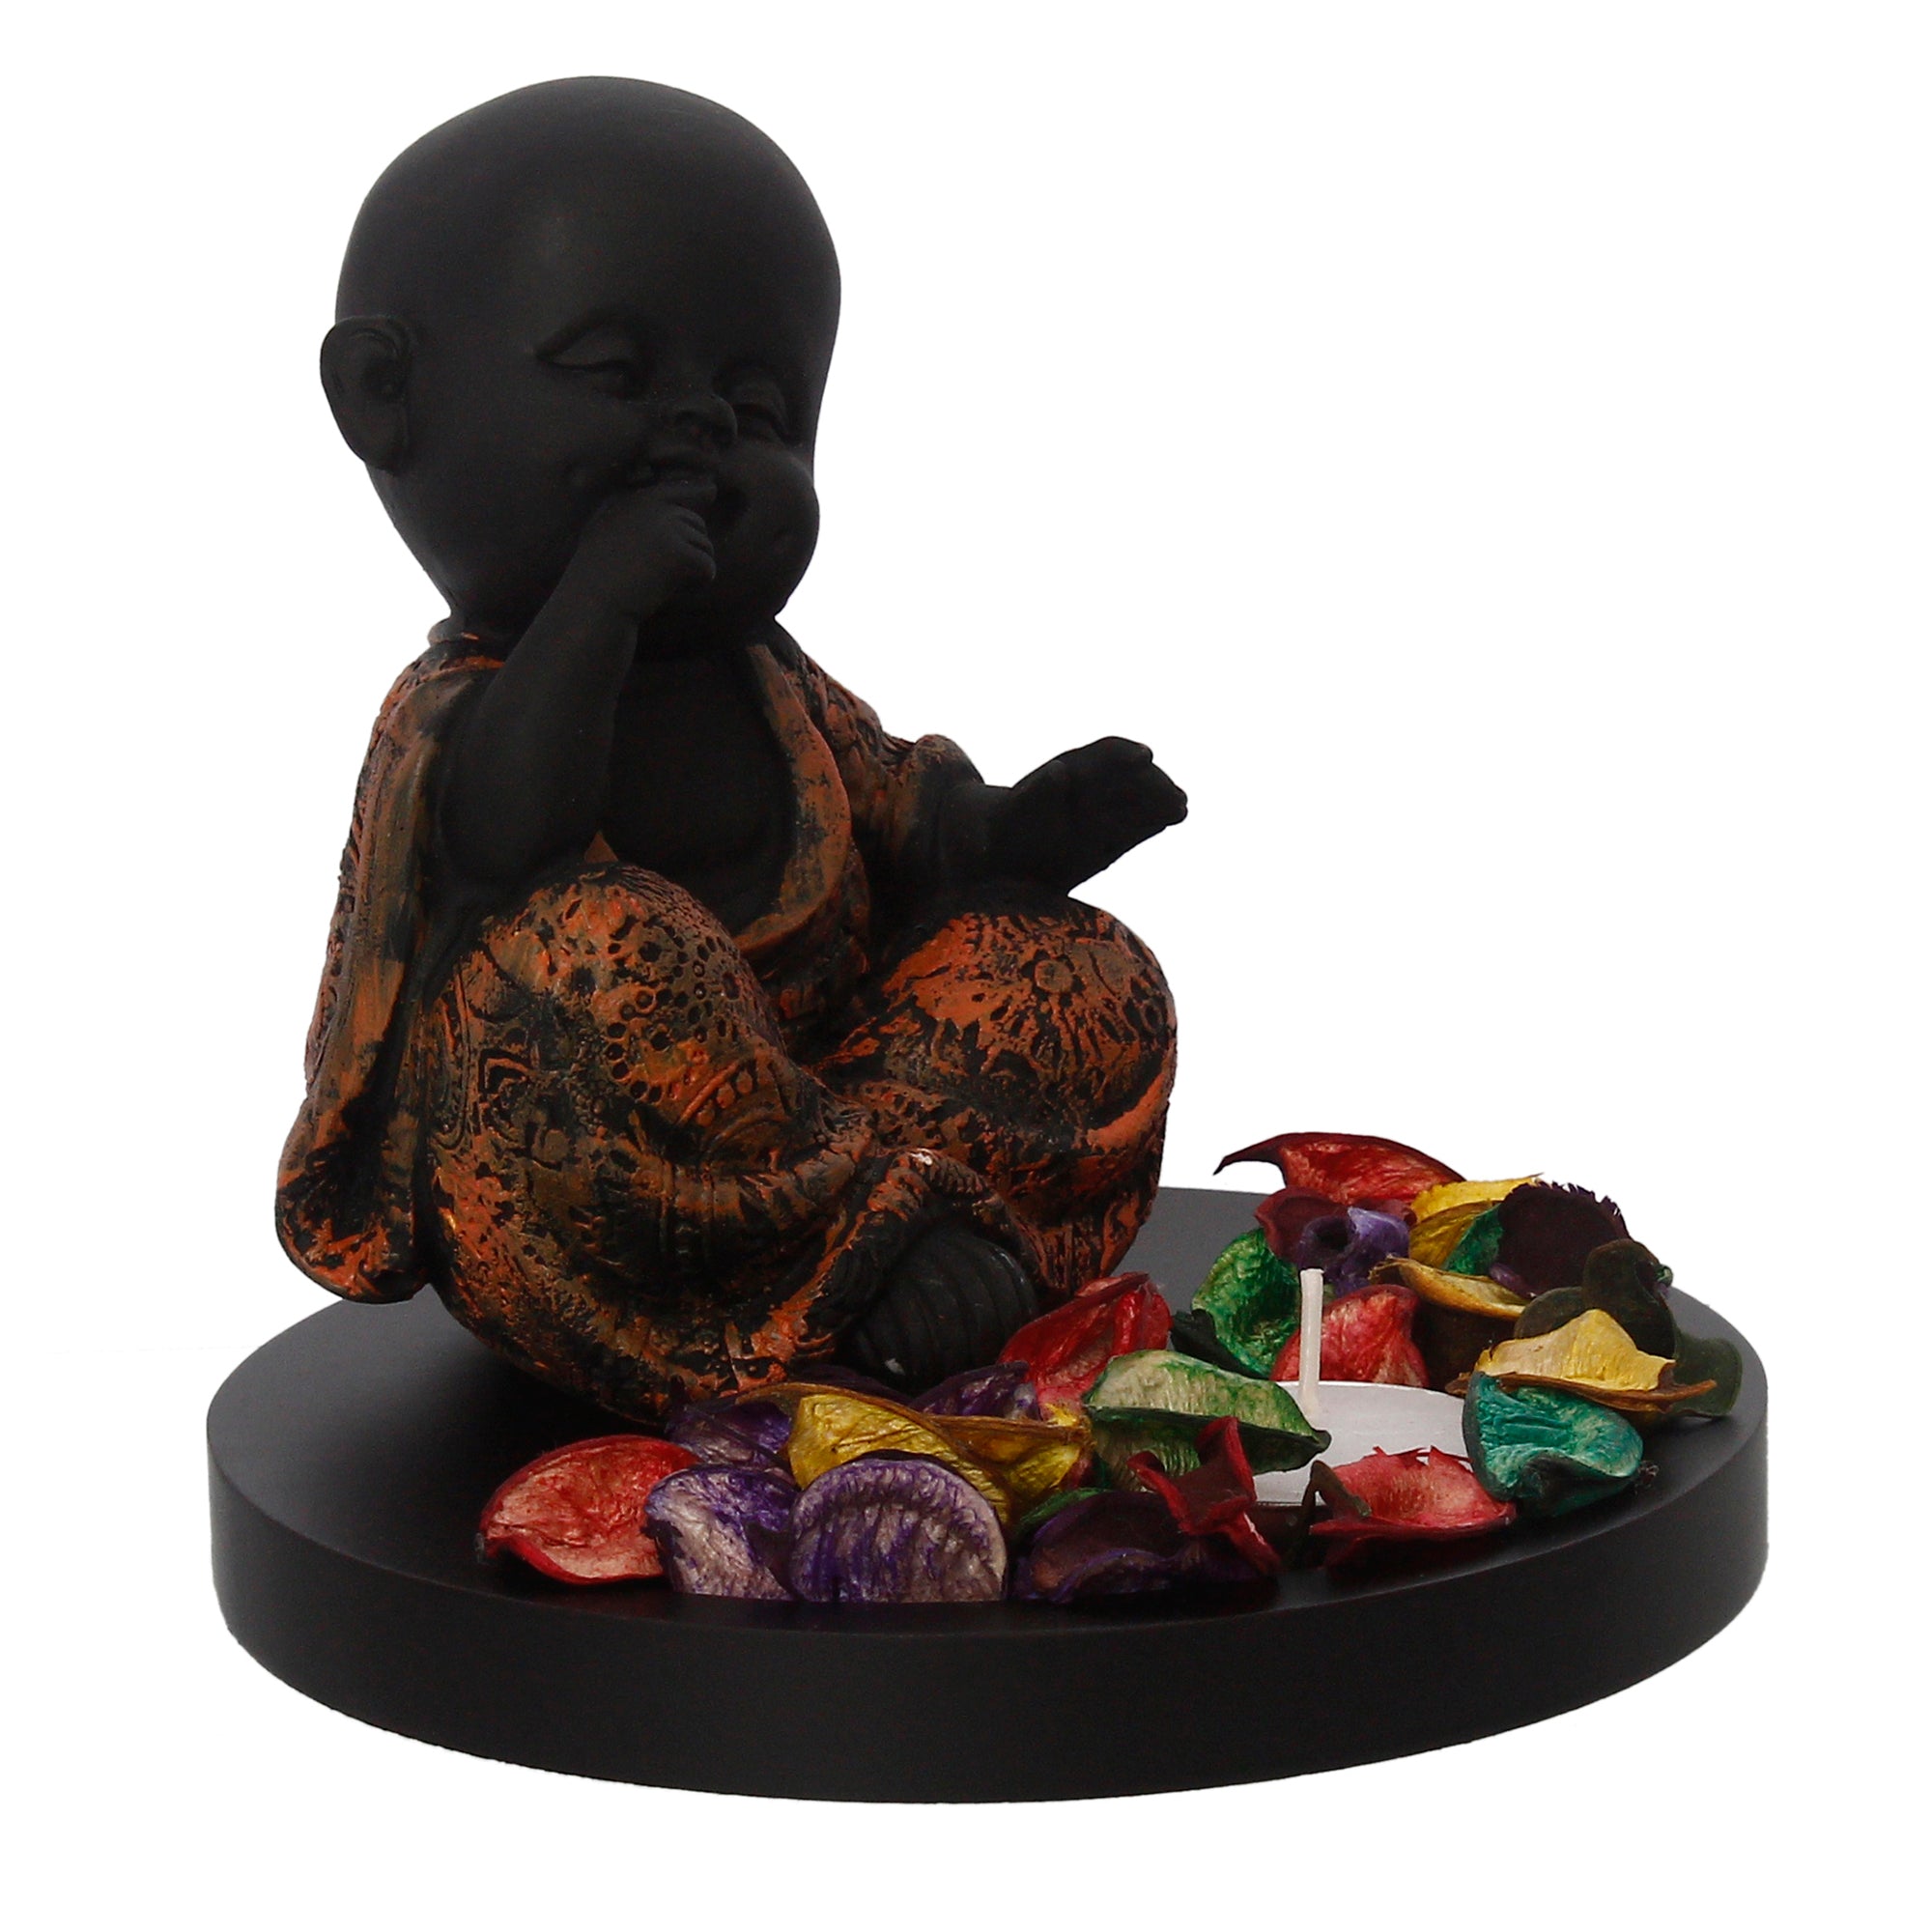 Decorative Smiling Copper Monk Buddha with Wooden Base, Fragranced Petals and Tealight 4